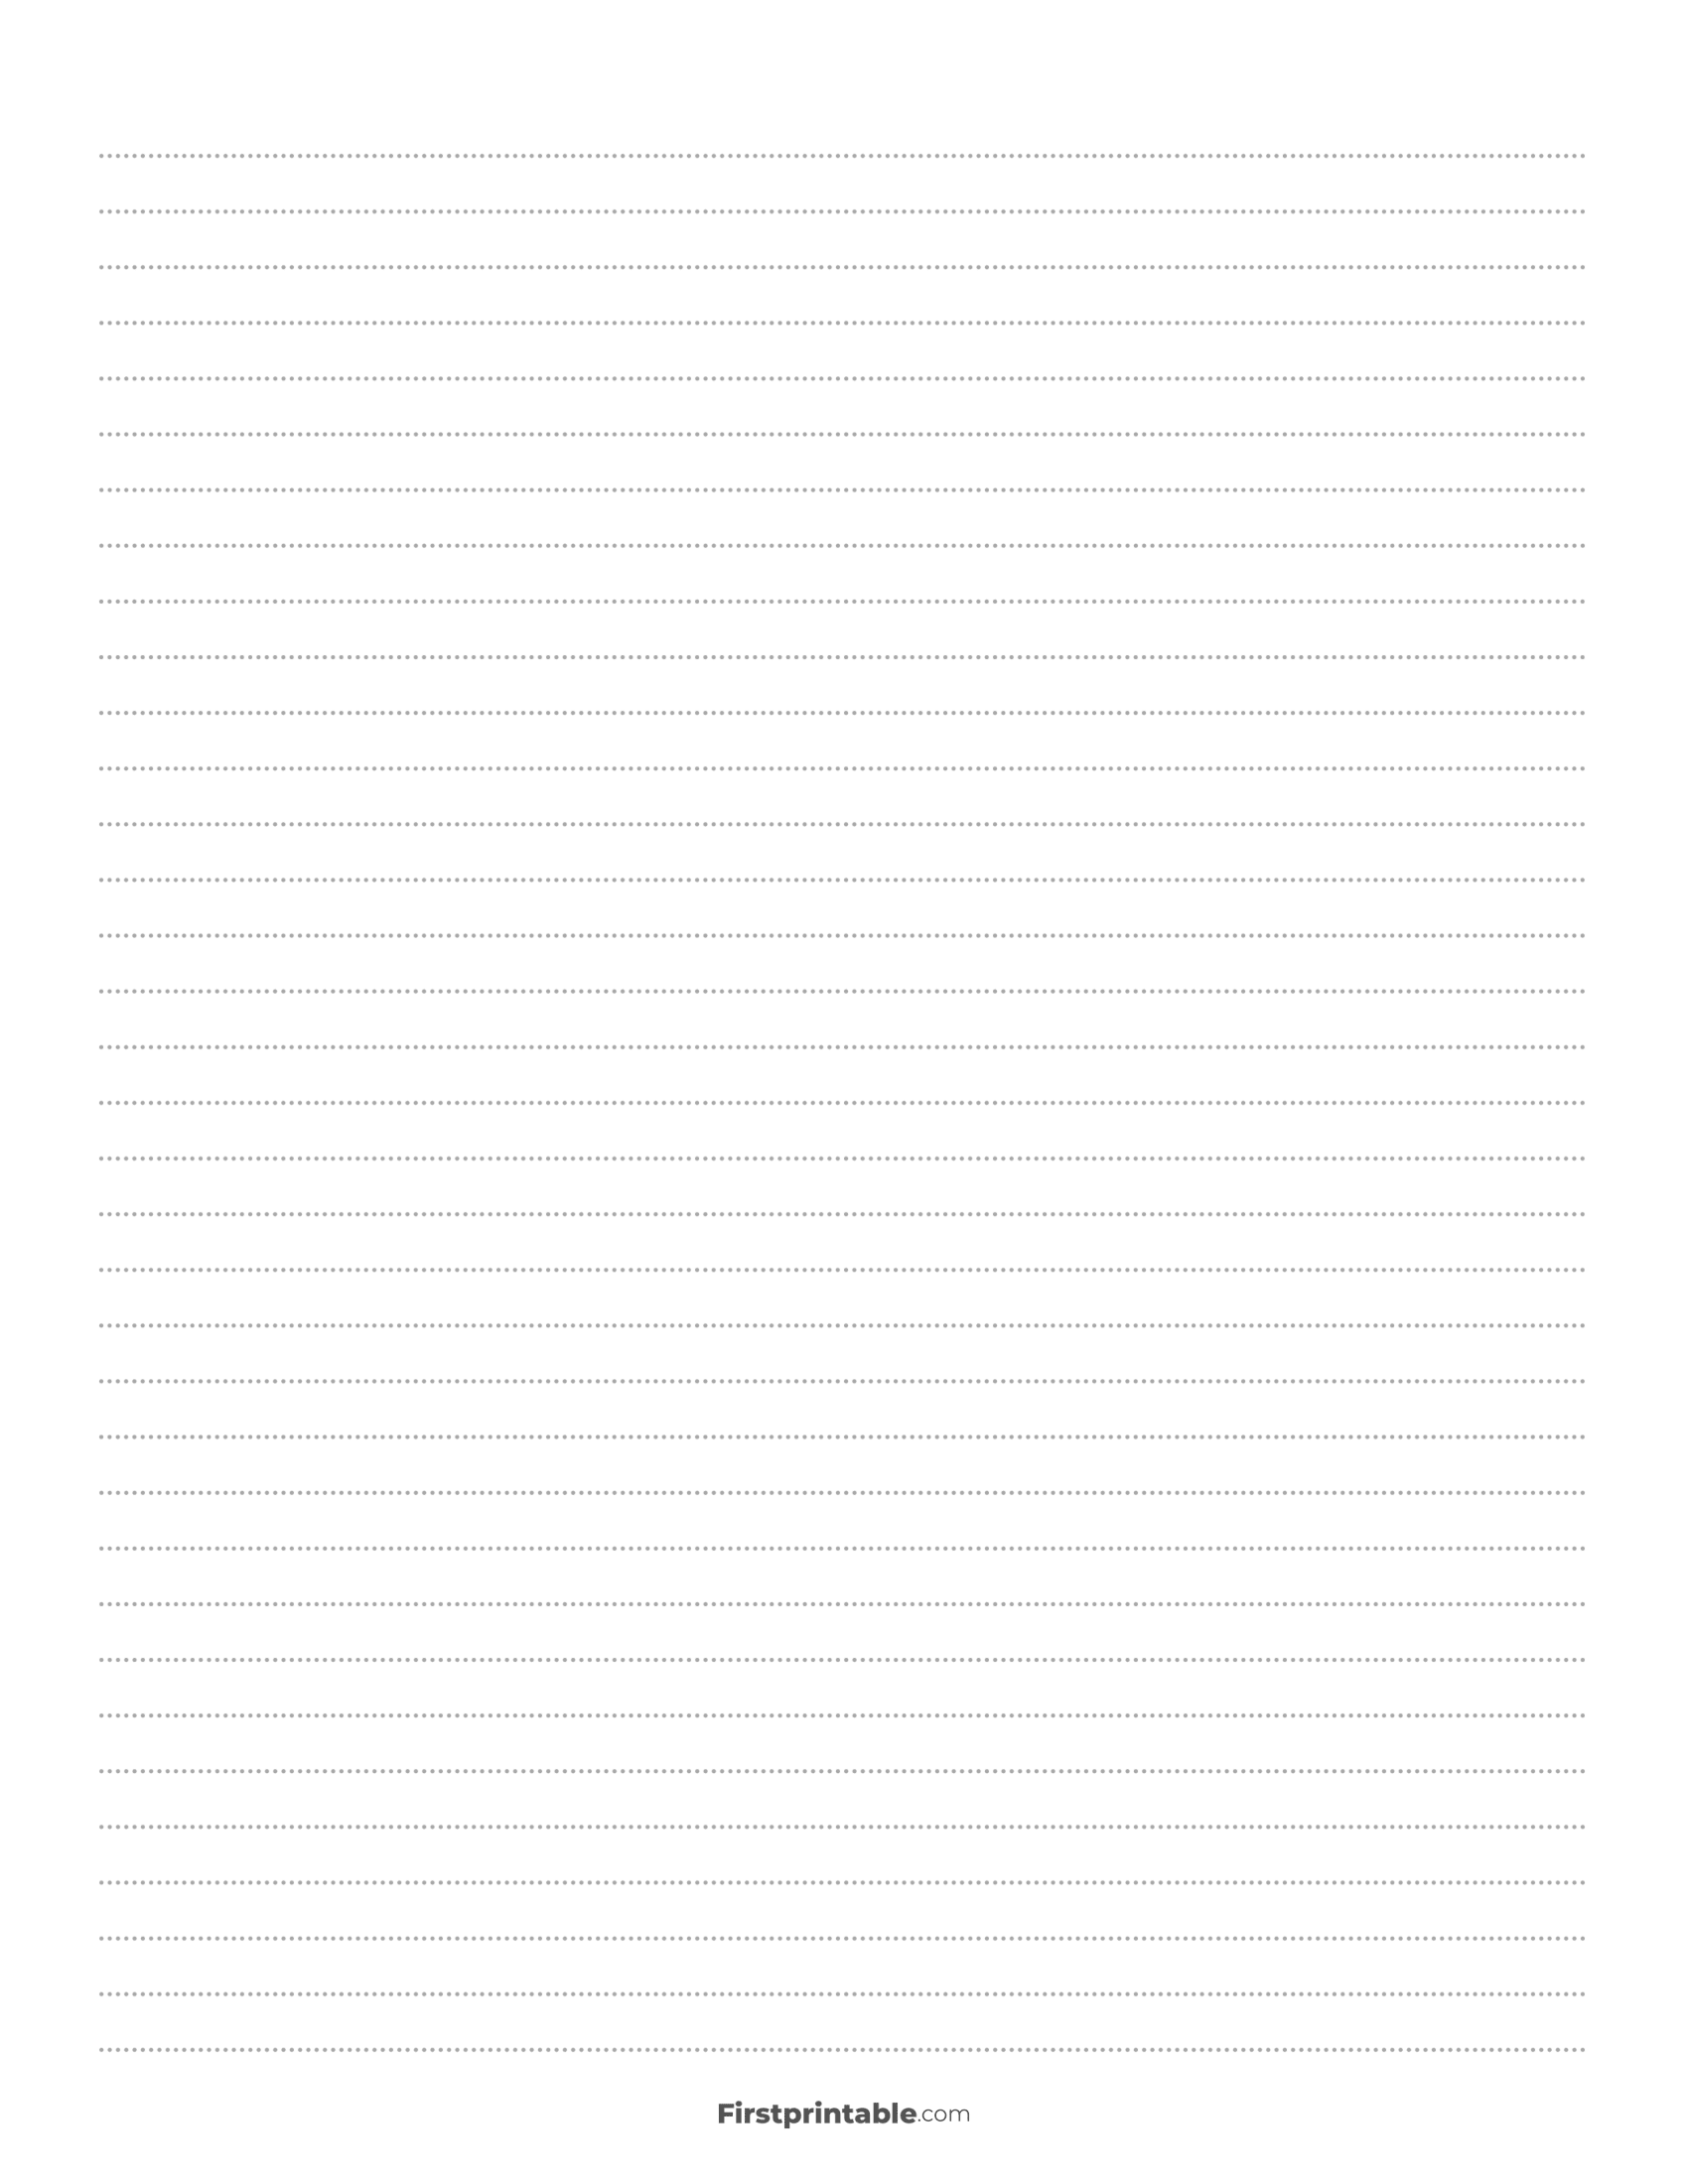 Printable Dotted Lined Paper Template - College Ruled